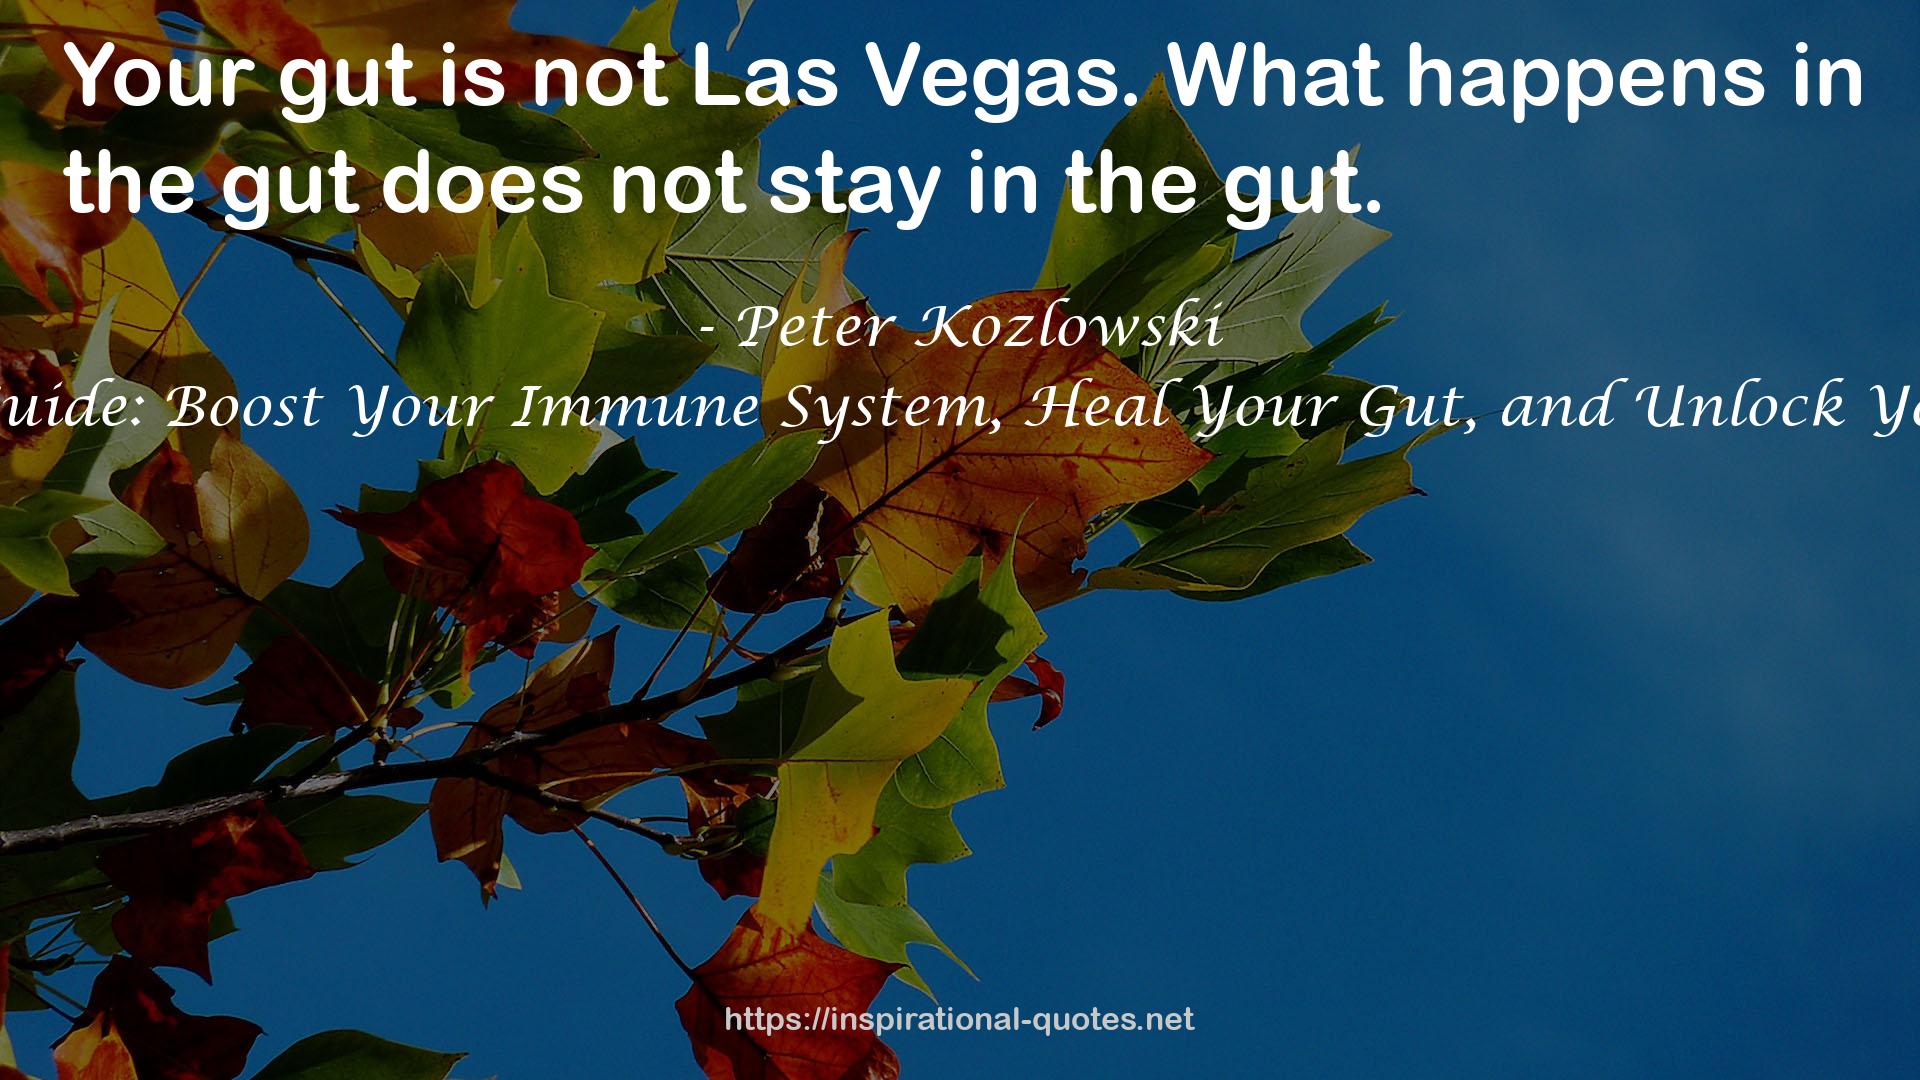 Unfunc Your Gut: A Functional Medicine Guide: Boost Your Immune System, Heal Your Gut, and Unlock Your Mental, Emotional and Spiritual Health QUOTES